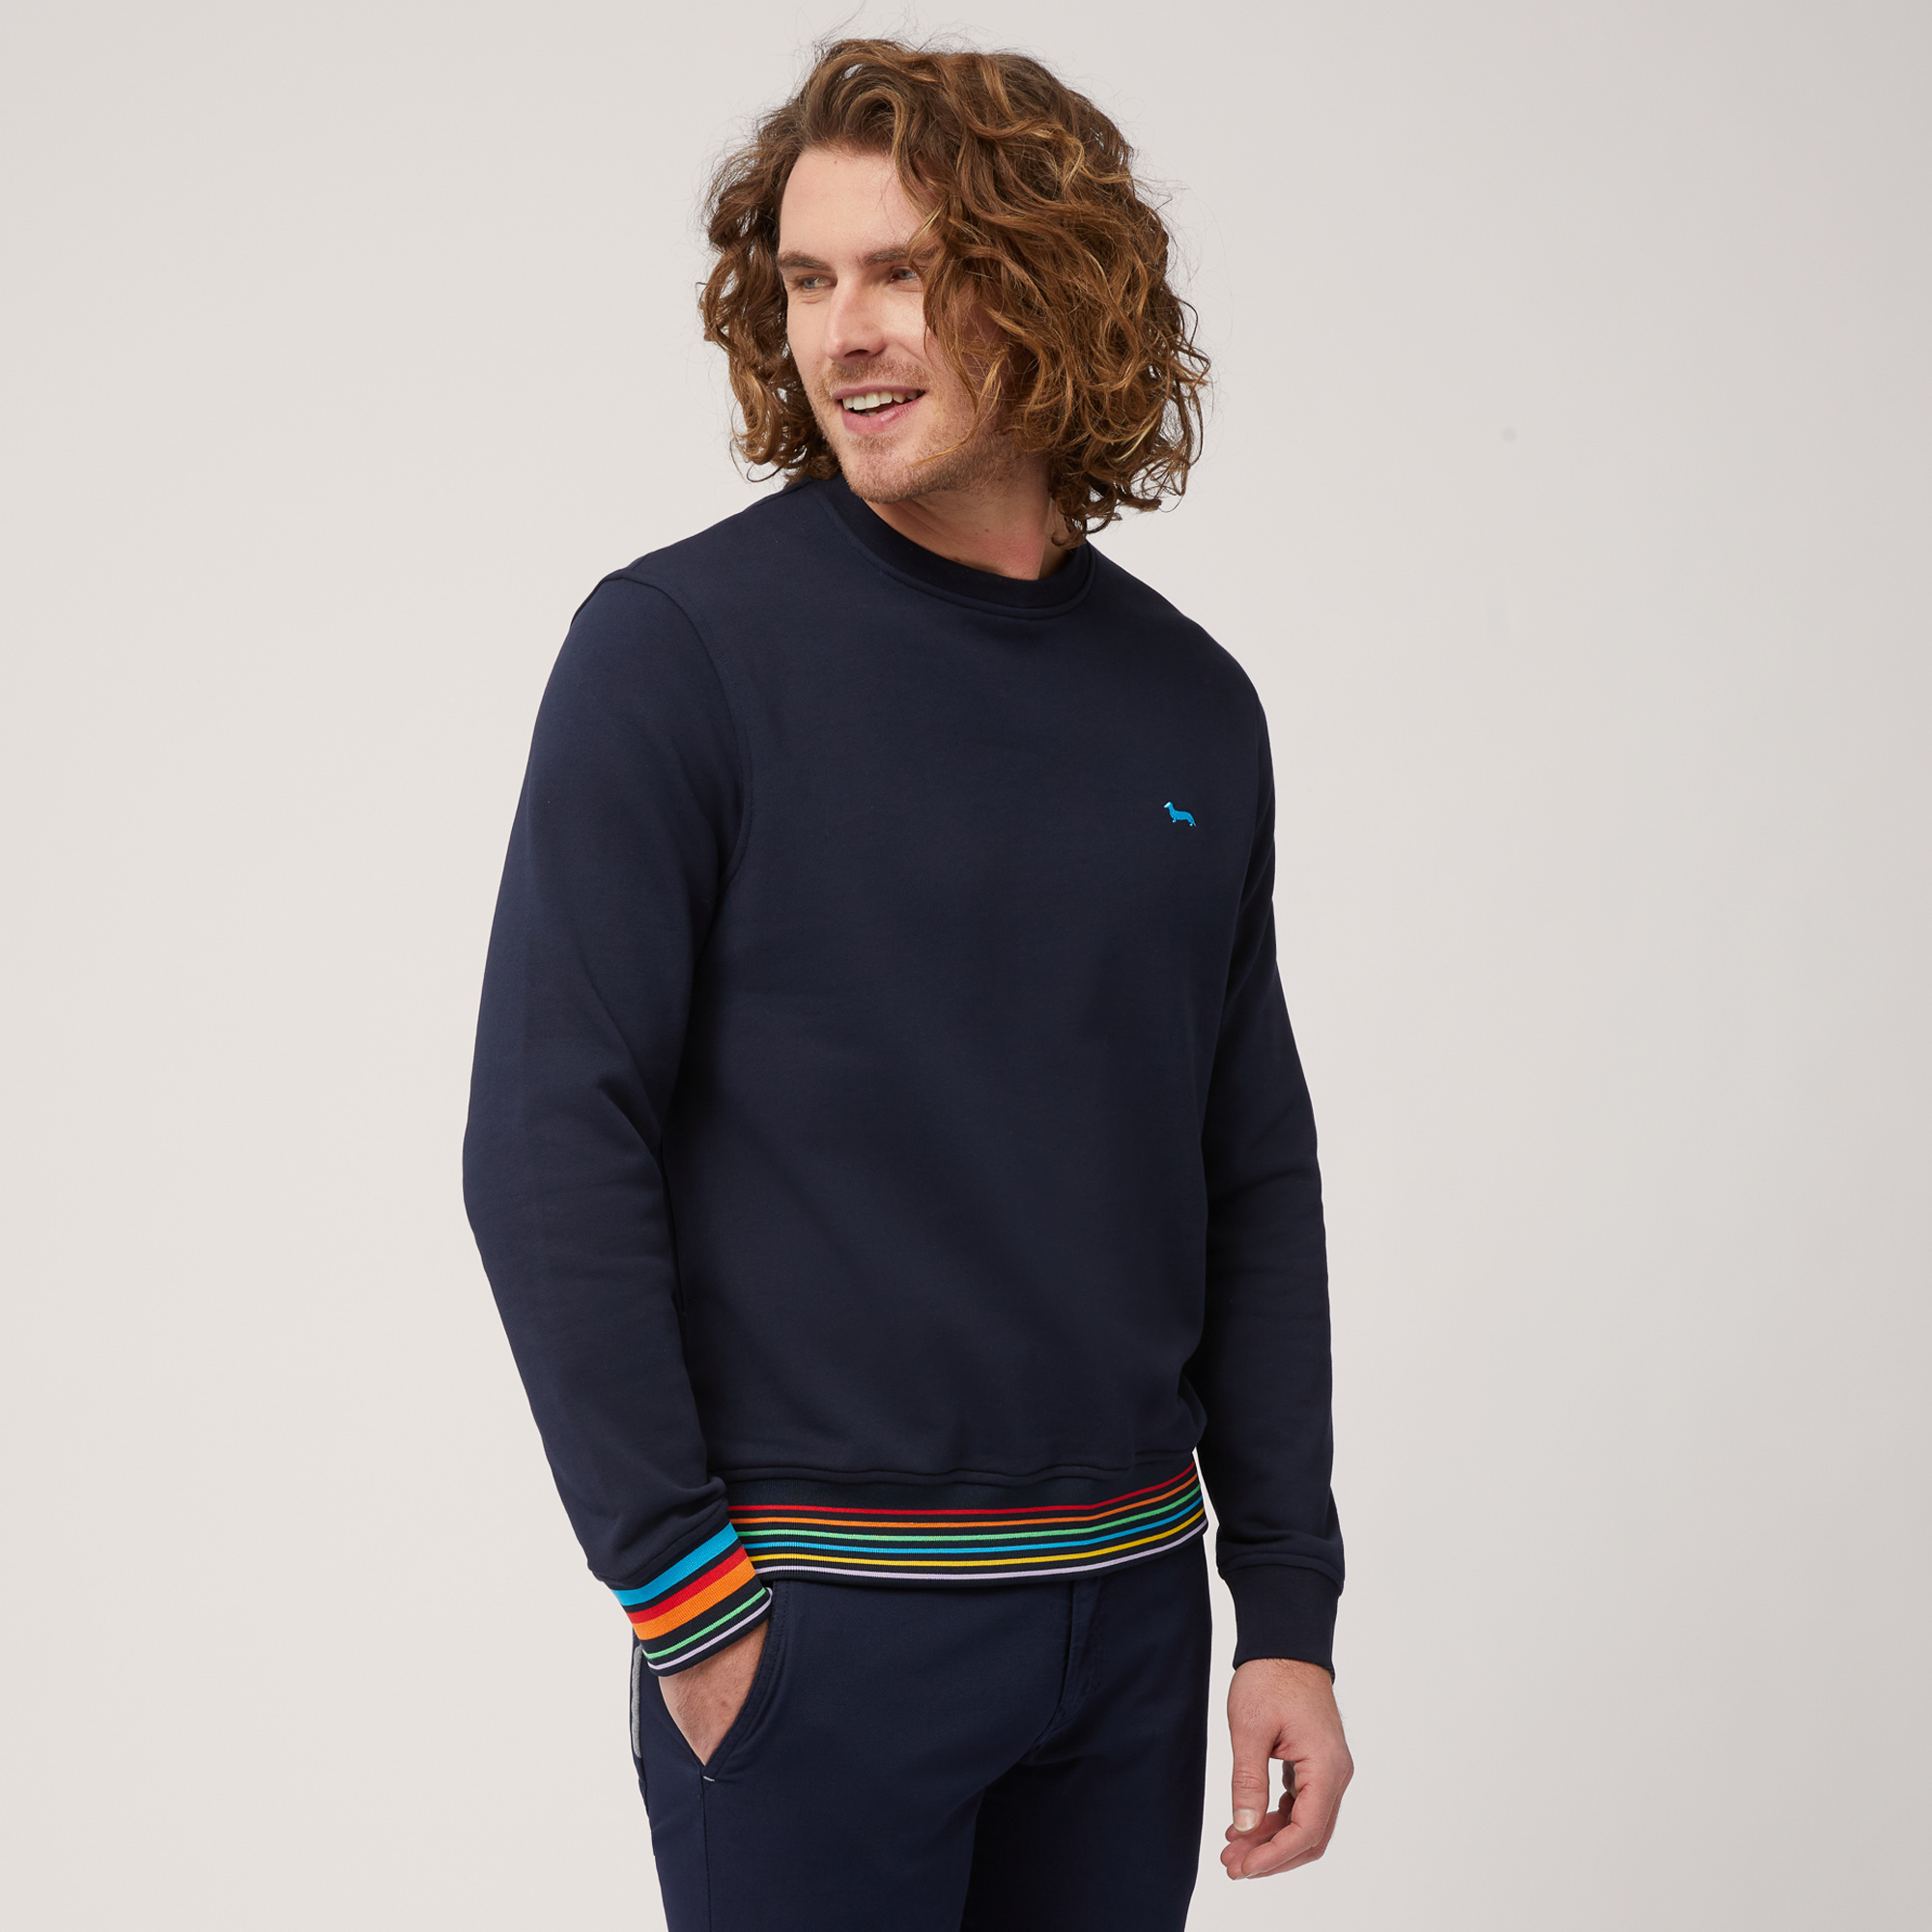 Crew Neck Cotton Pullover with Striped Details, Blue, large